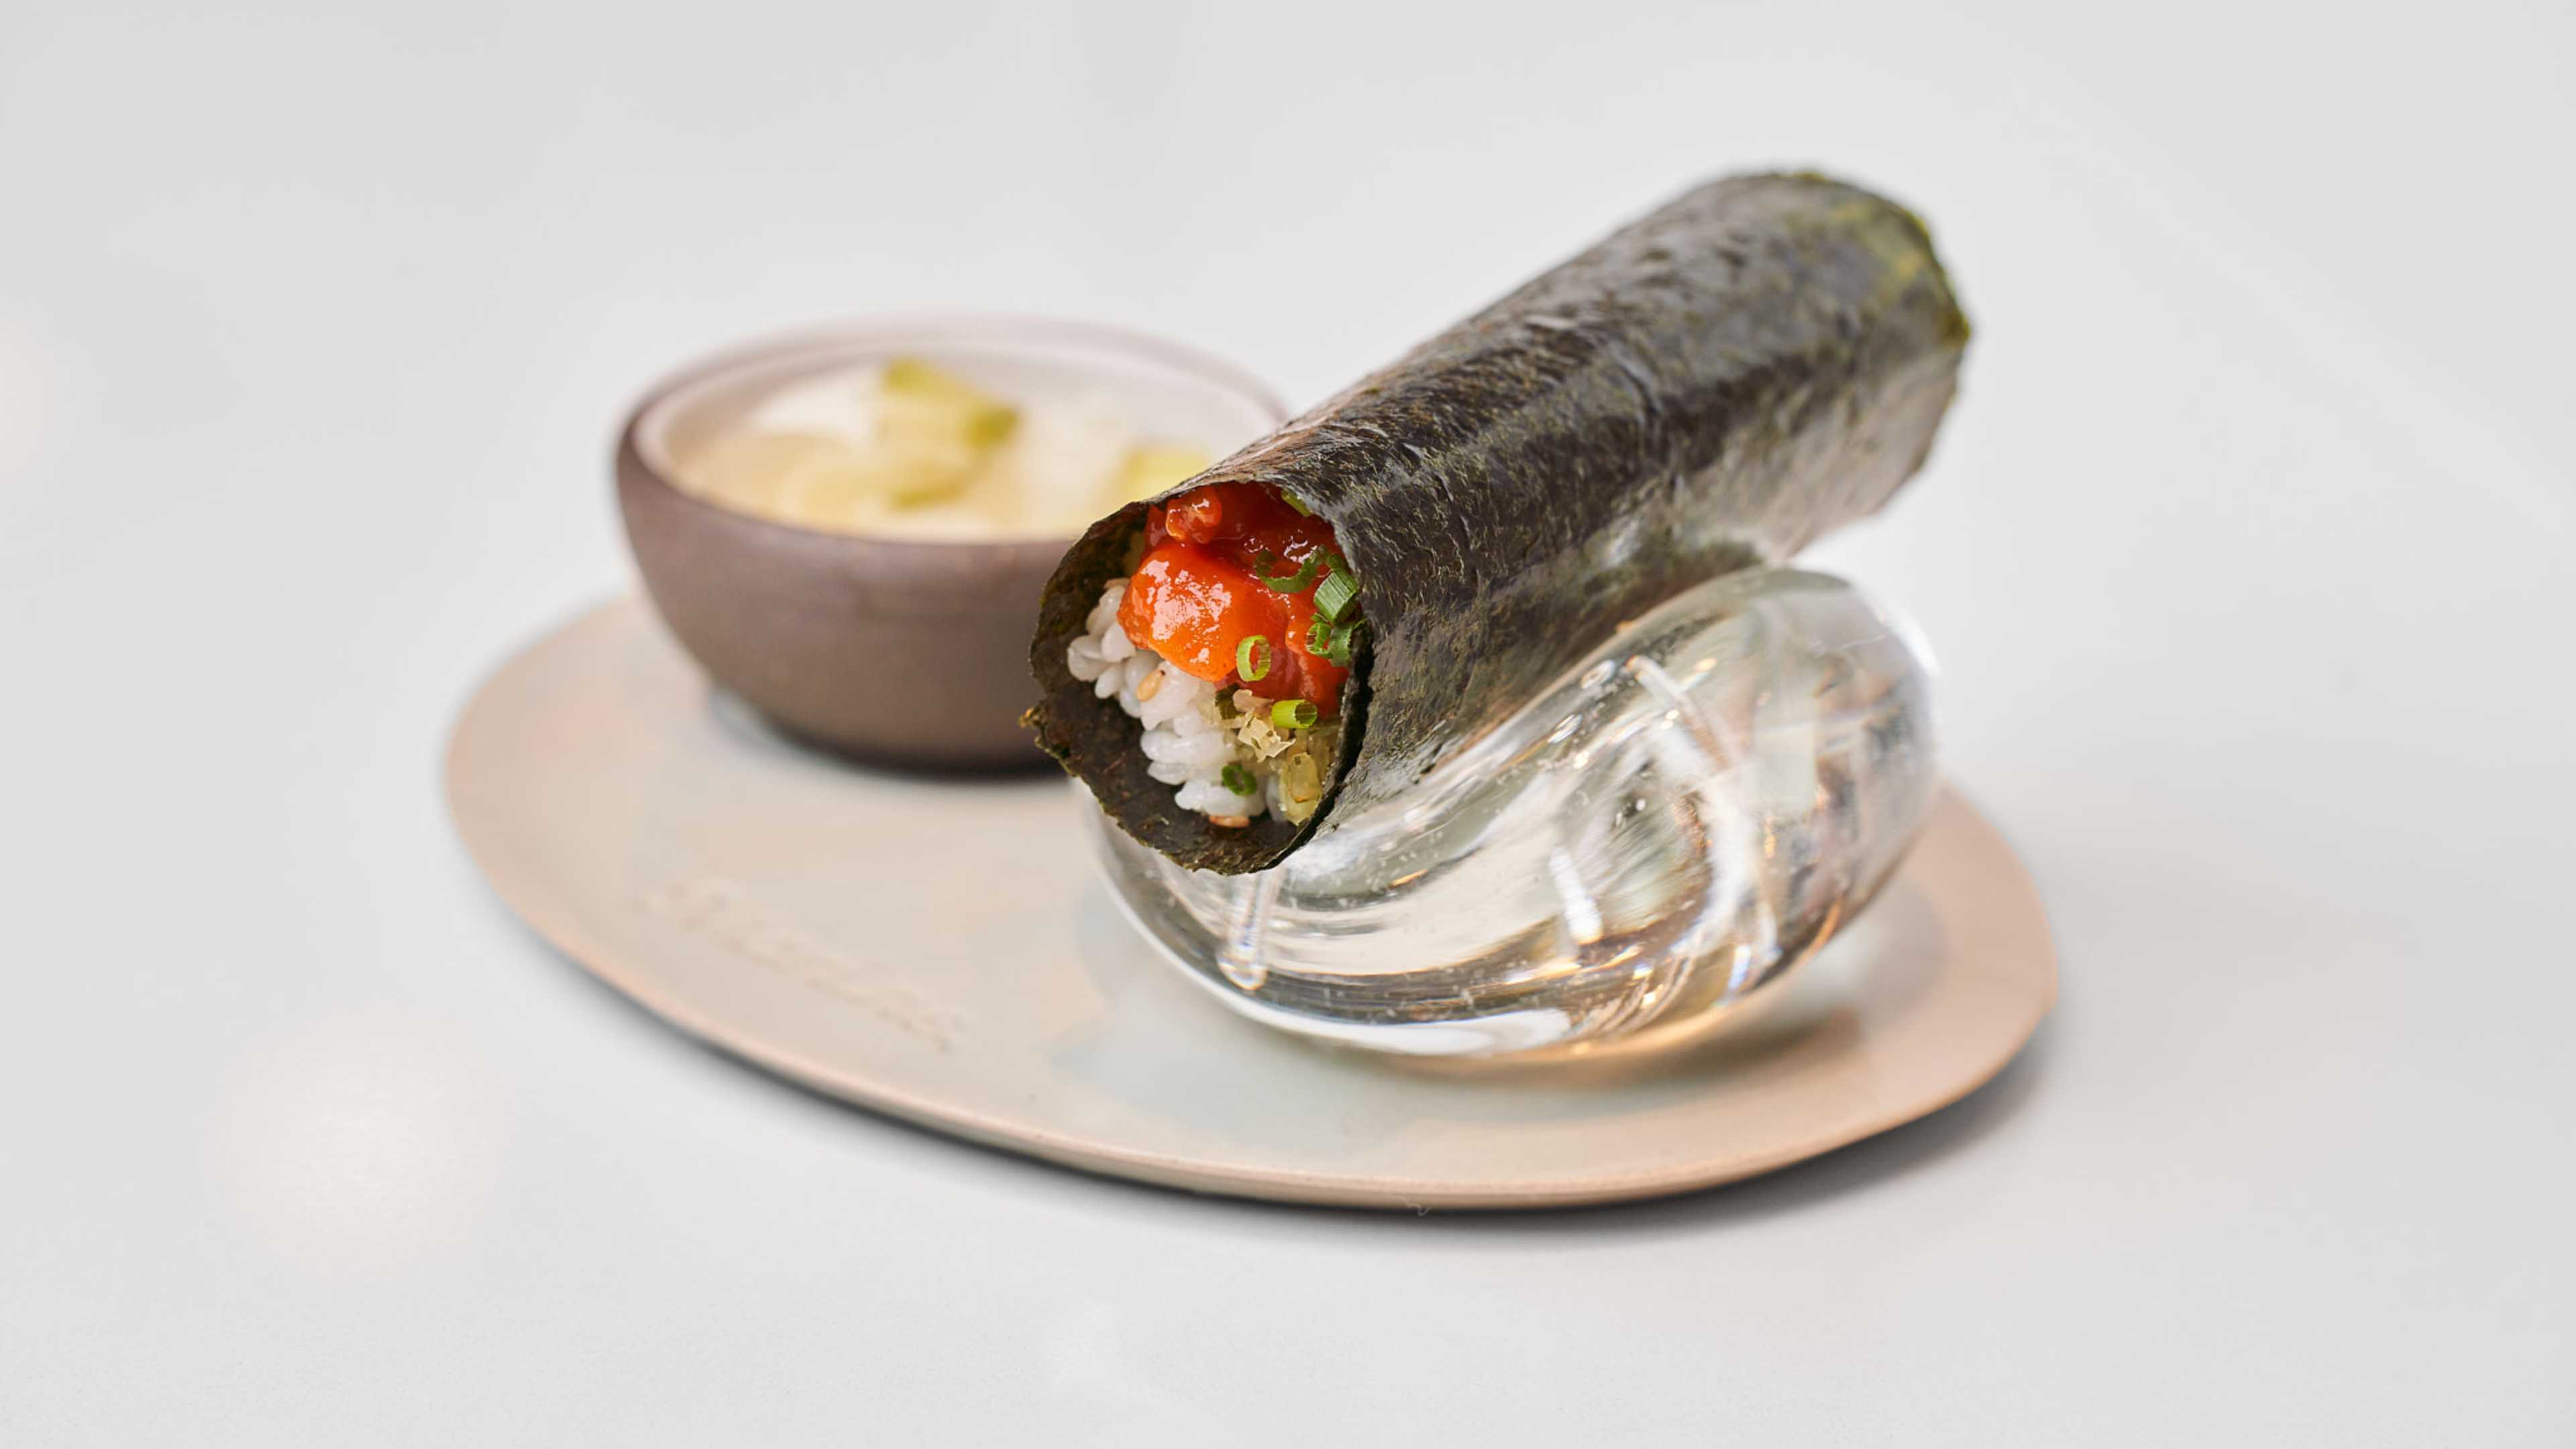 A handroll with rice and fish inside.